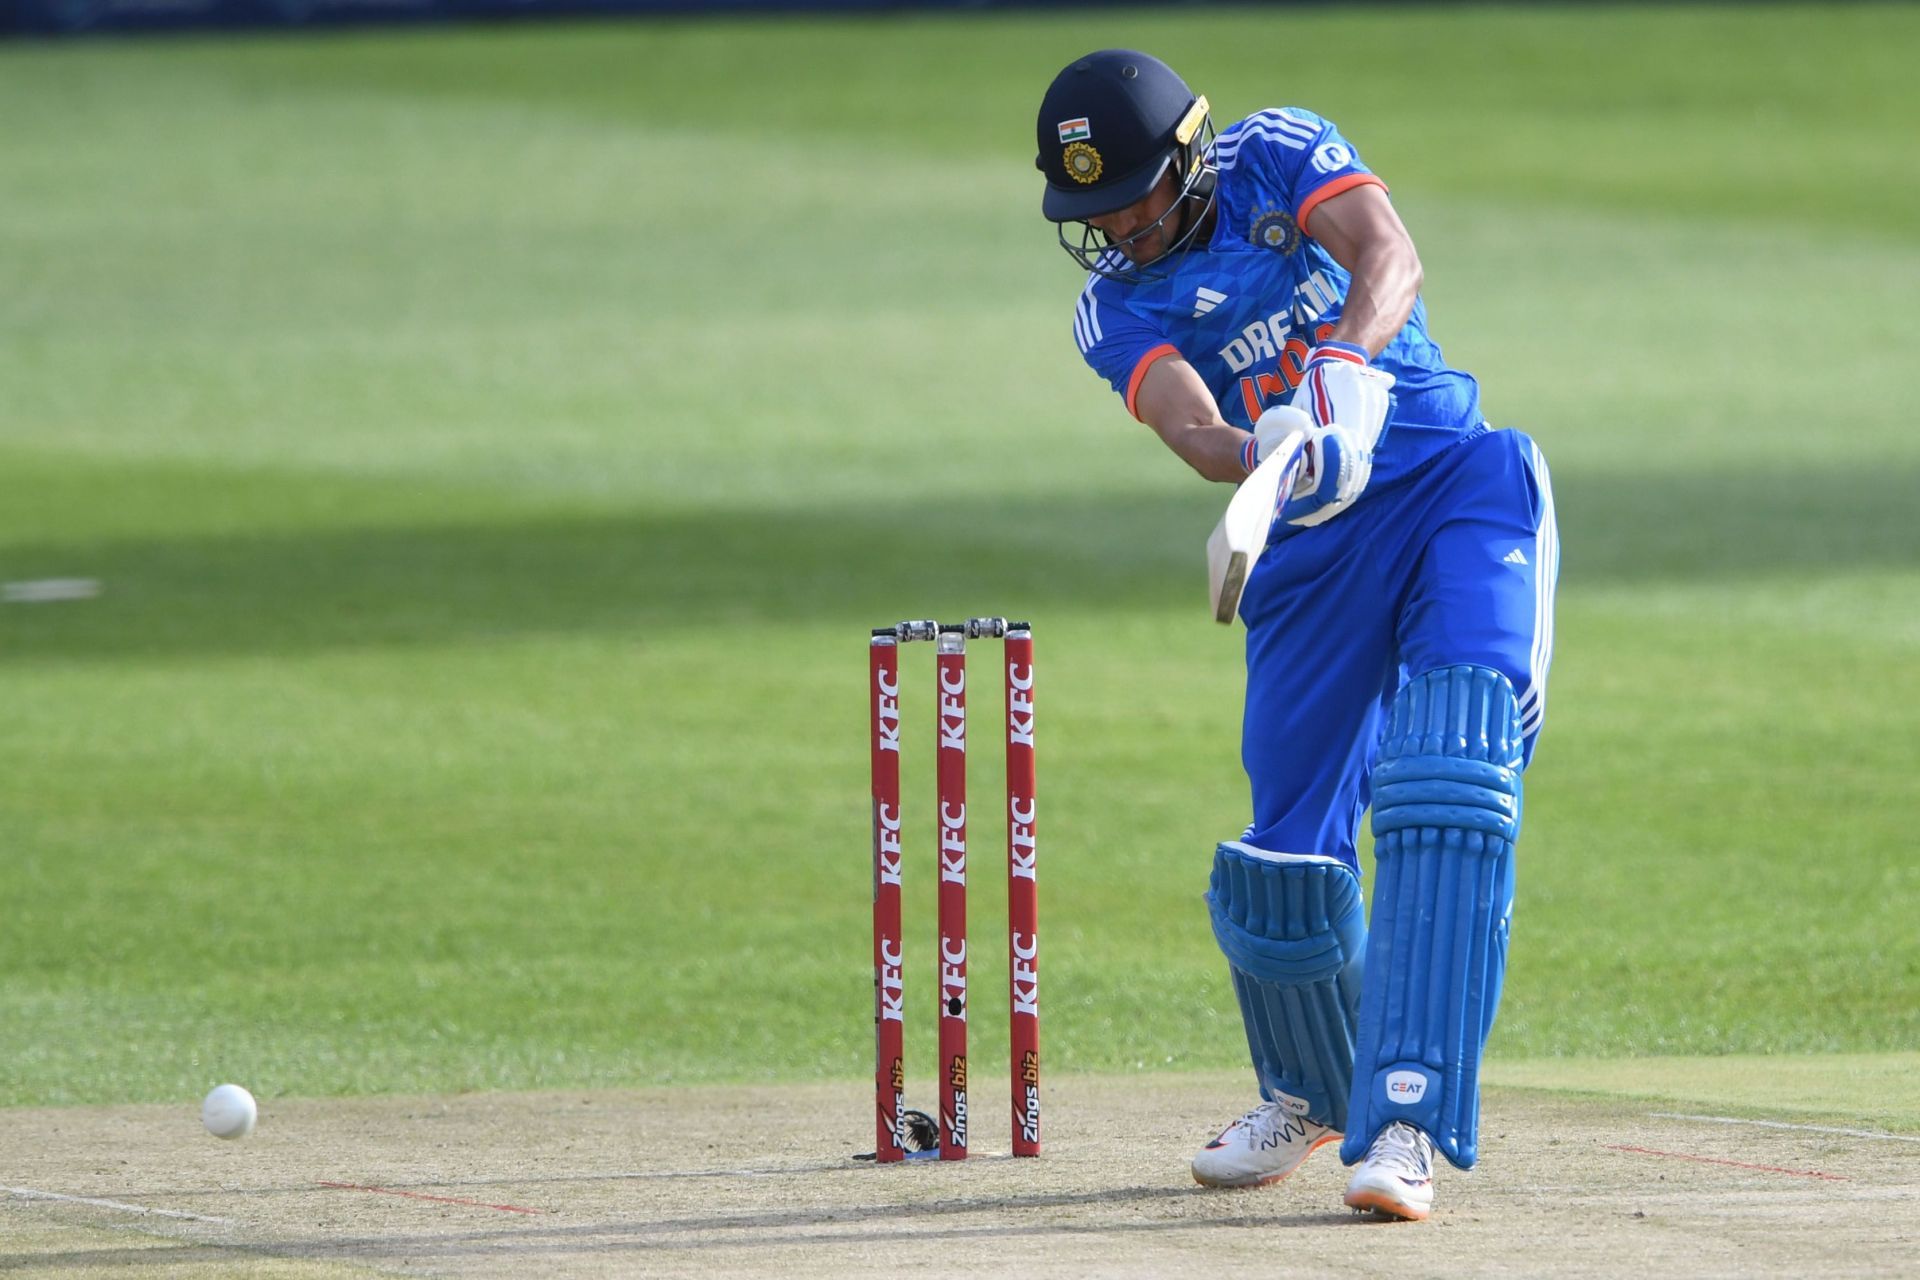 The Indian opener batting in the third T20I against South Africa. (Pic: Getty Images)